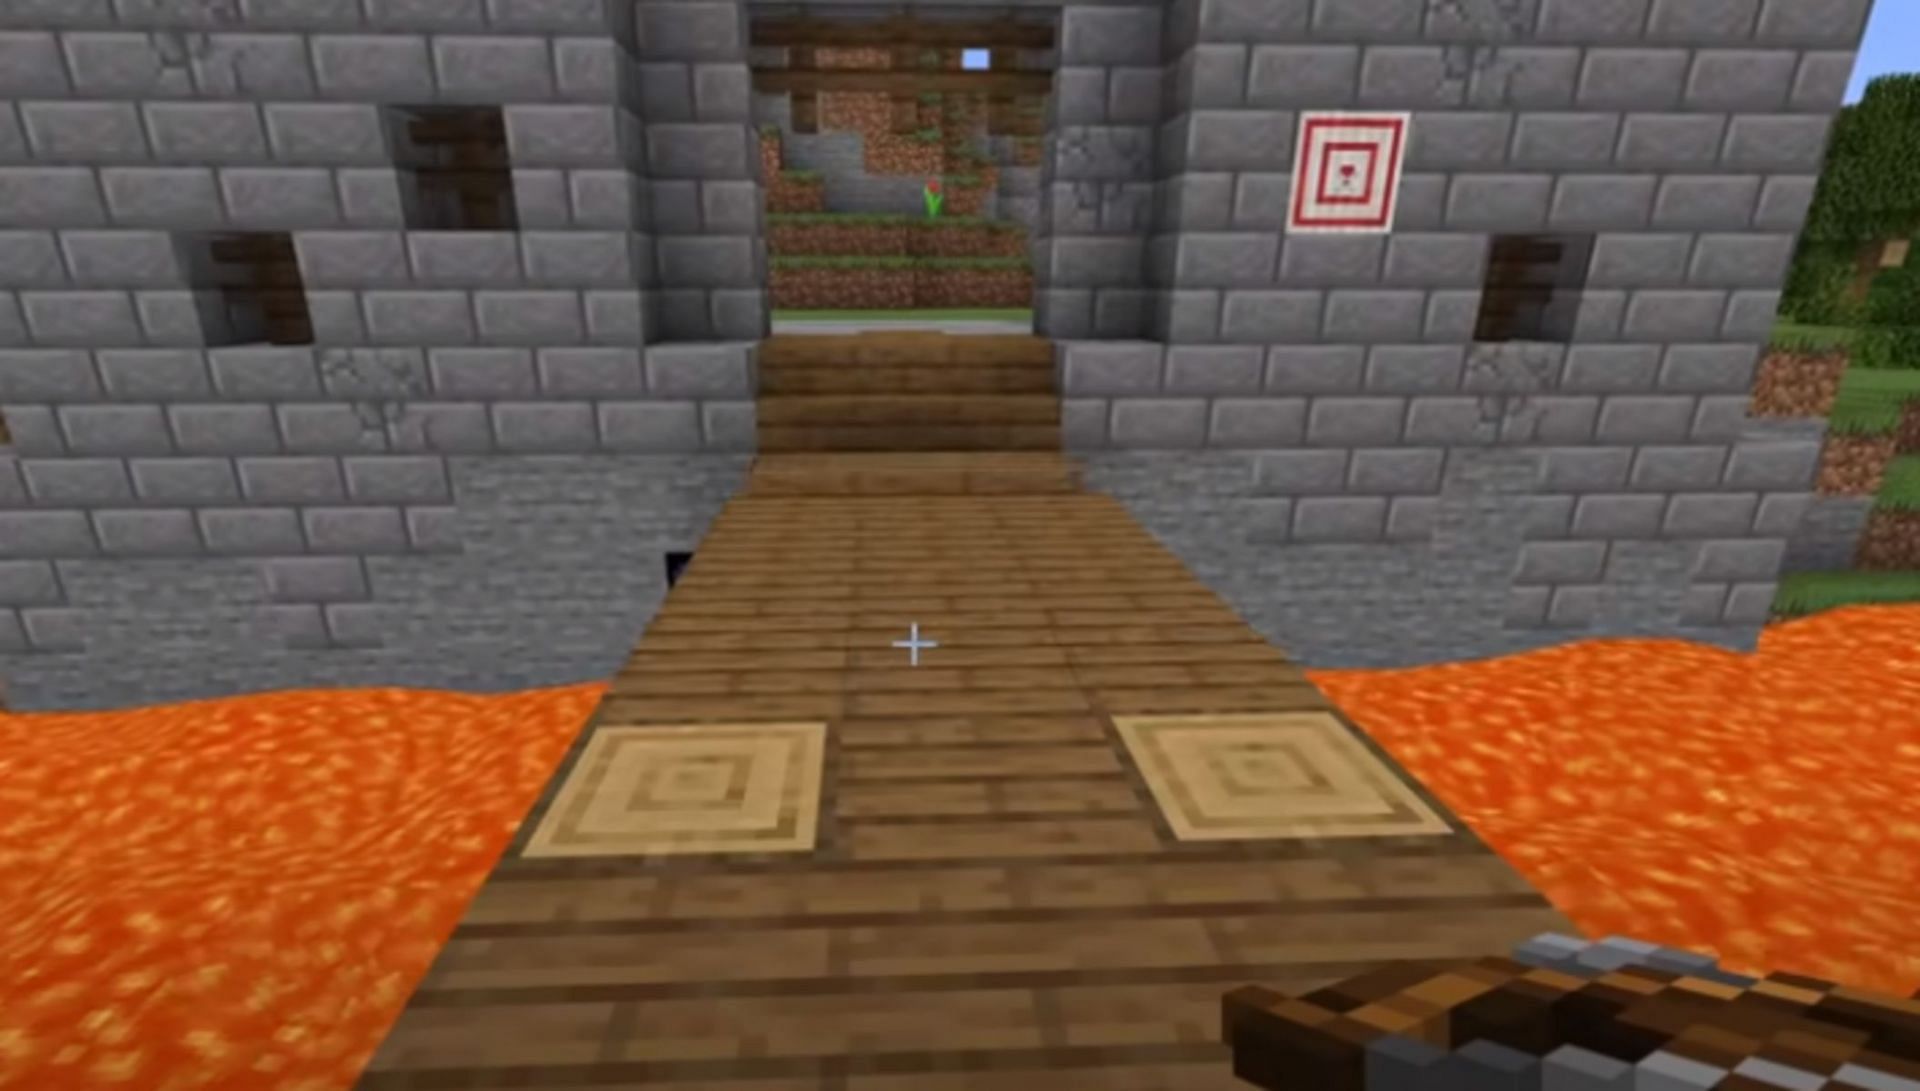 Enter your castle safely in style with this build (Image via BBlocks/YouTube)